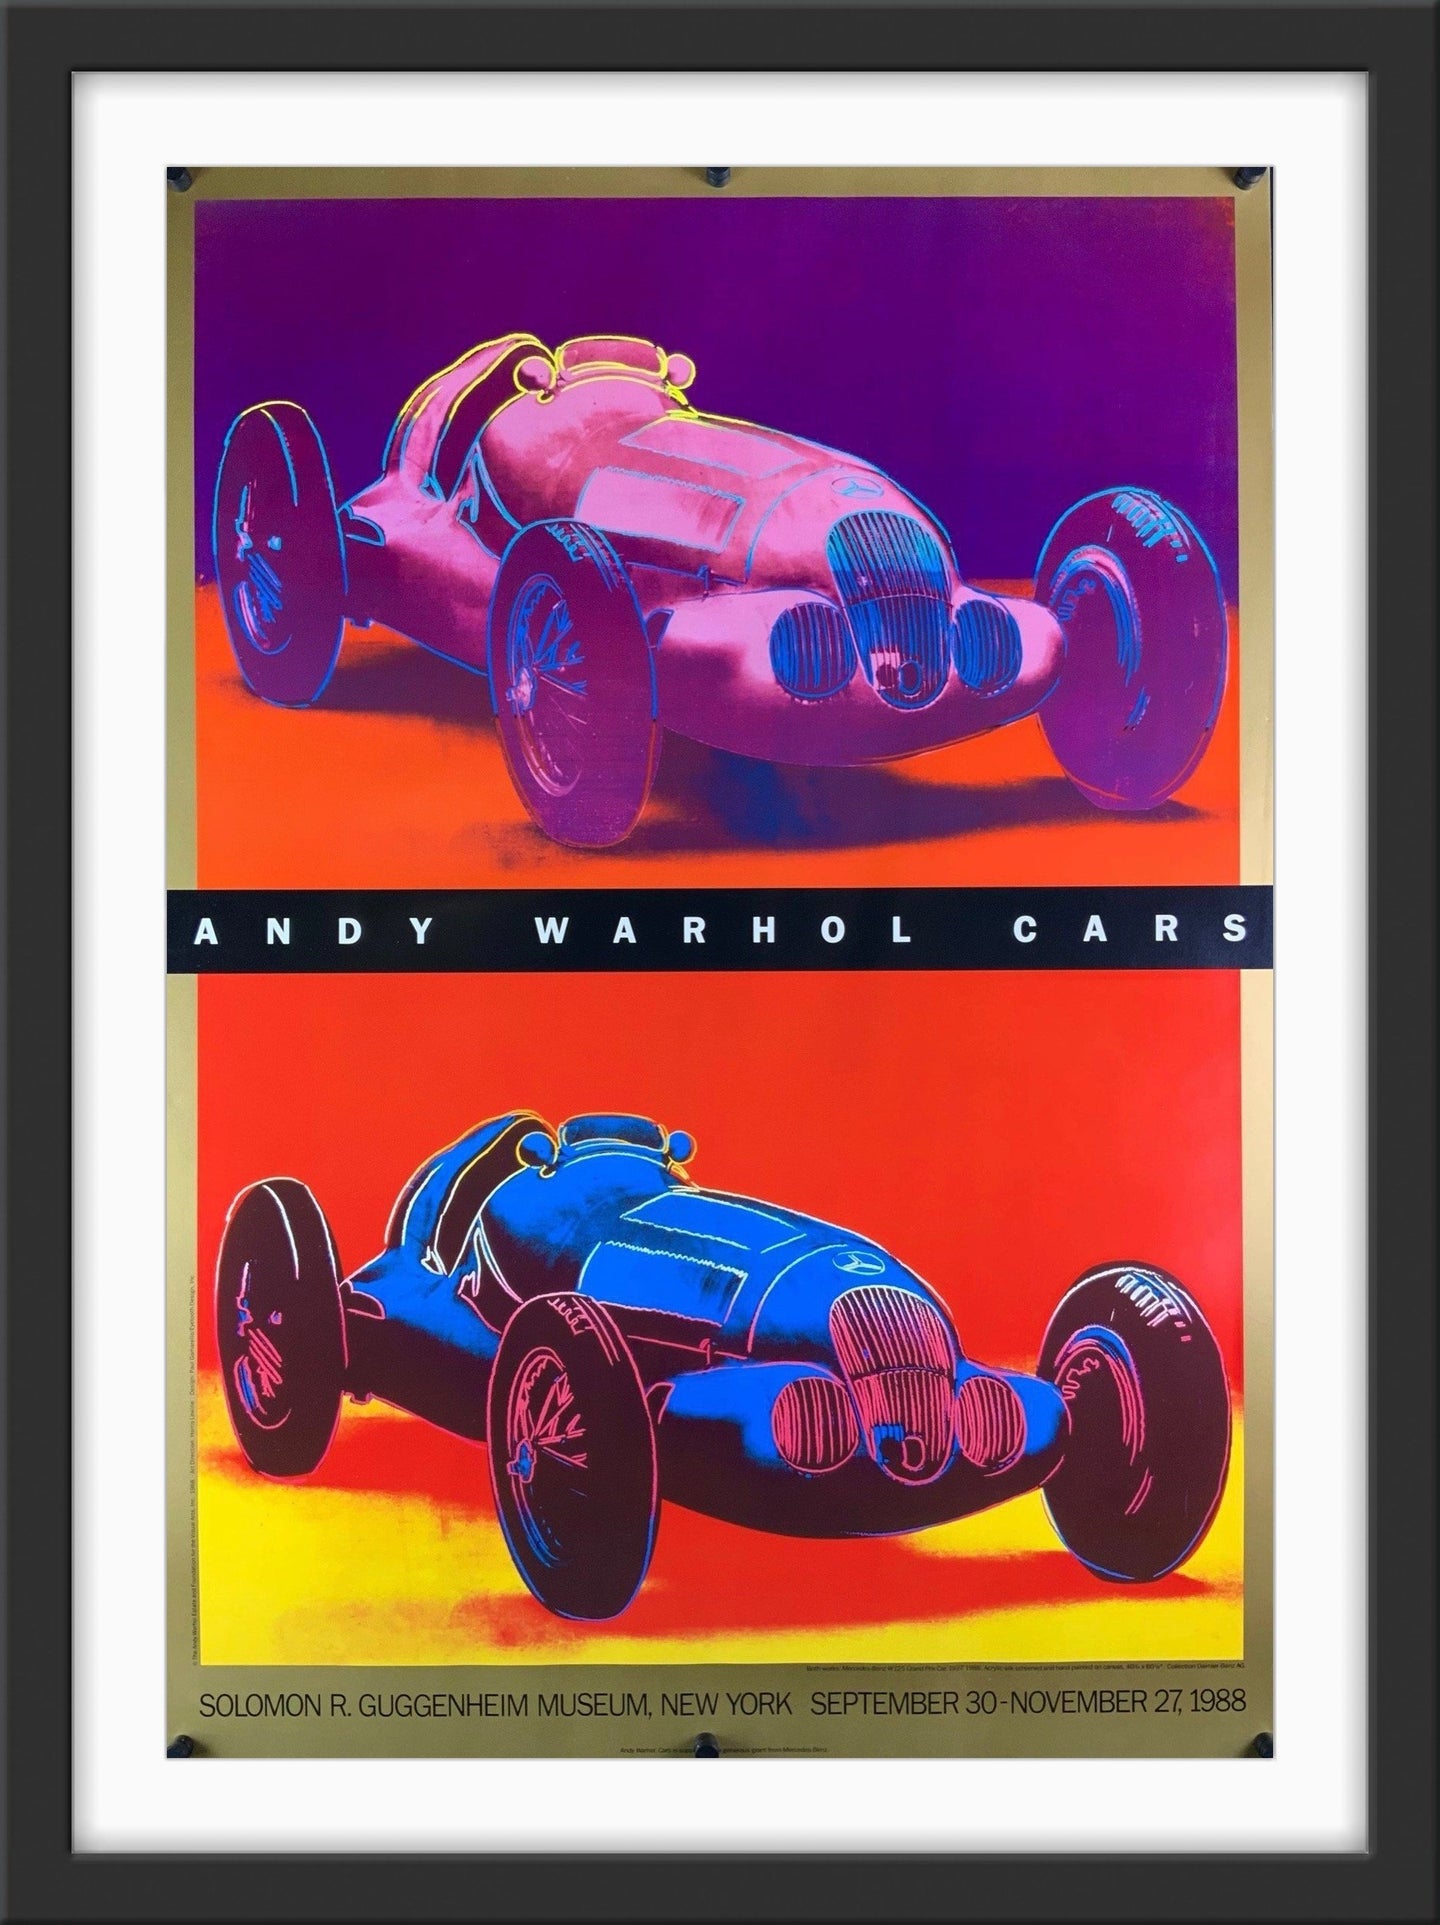 An original exhibition poster for Andy Warhol Cars at the Guggenheim Museum, New York, 1988